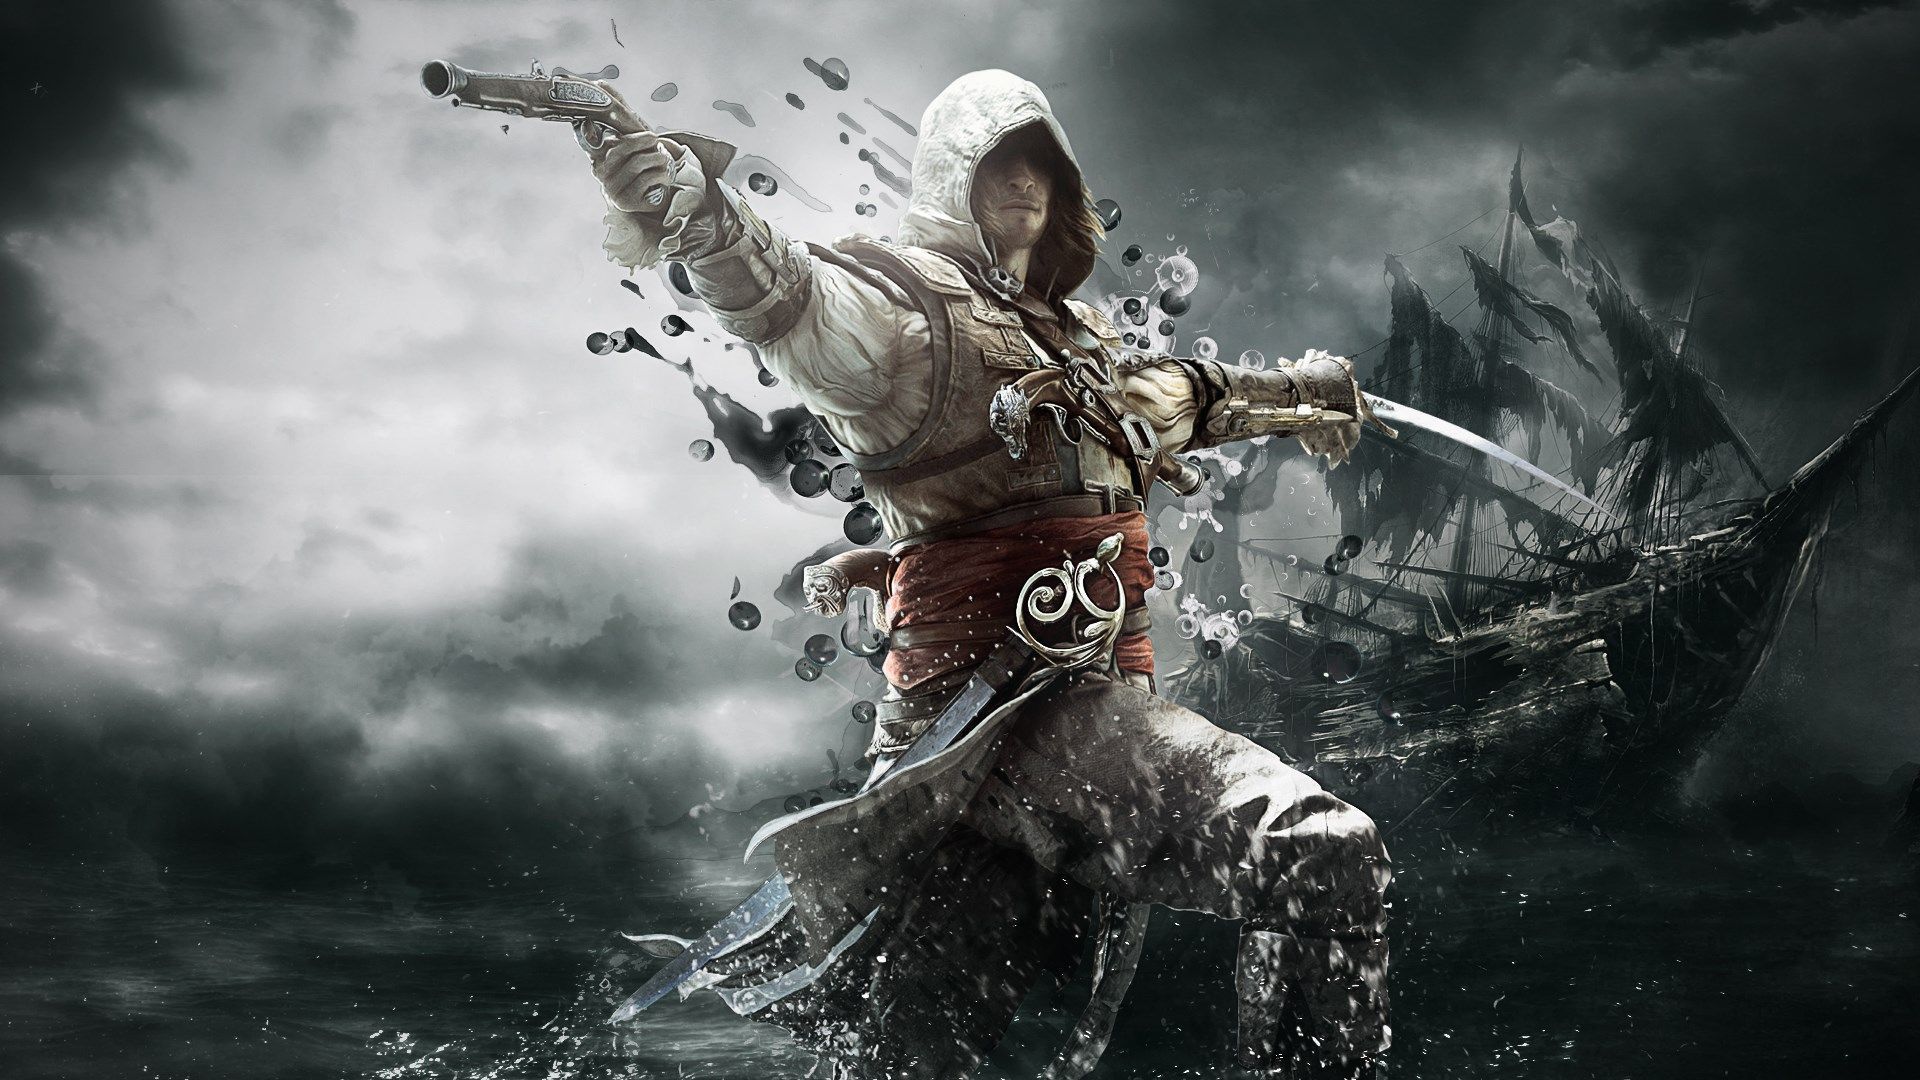 Assassin's Creed IV Black Flag HD Wallpapers and Images Free, New ...